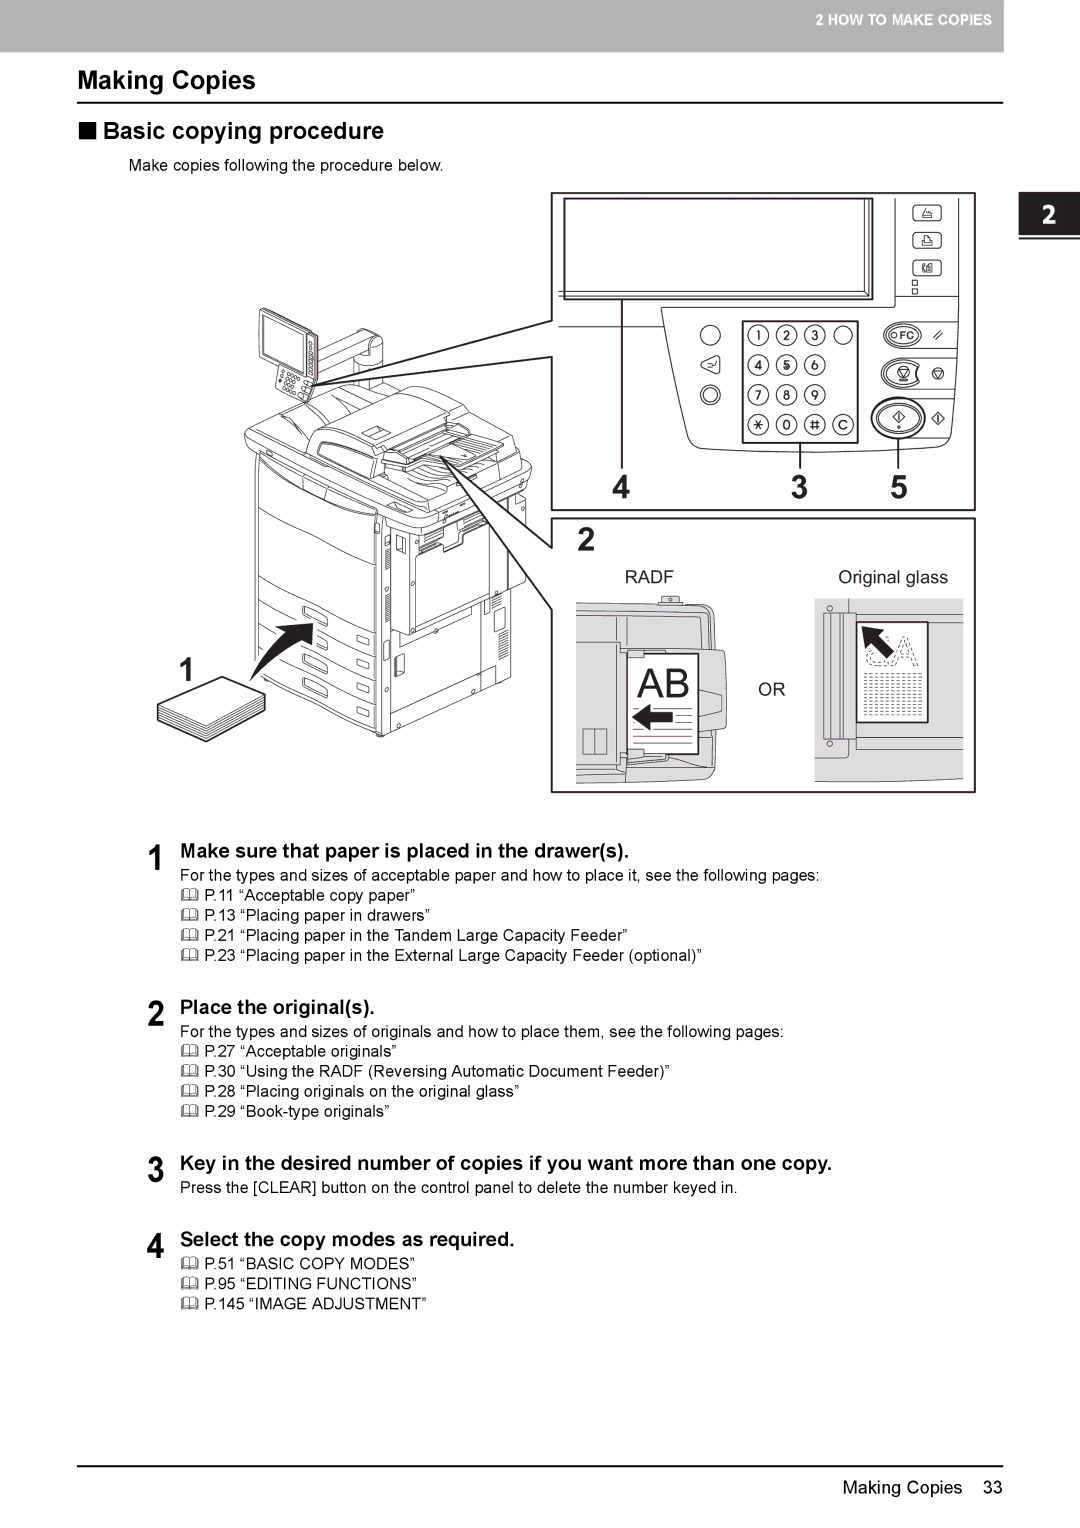 Toshiba e-STUDIO5520C, 6520c manual Making Copies, „ Basic copying procedure, Make sure that paper is placed in the drawers 